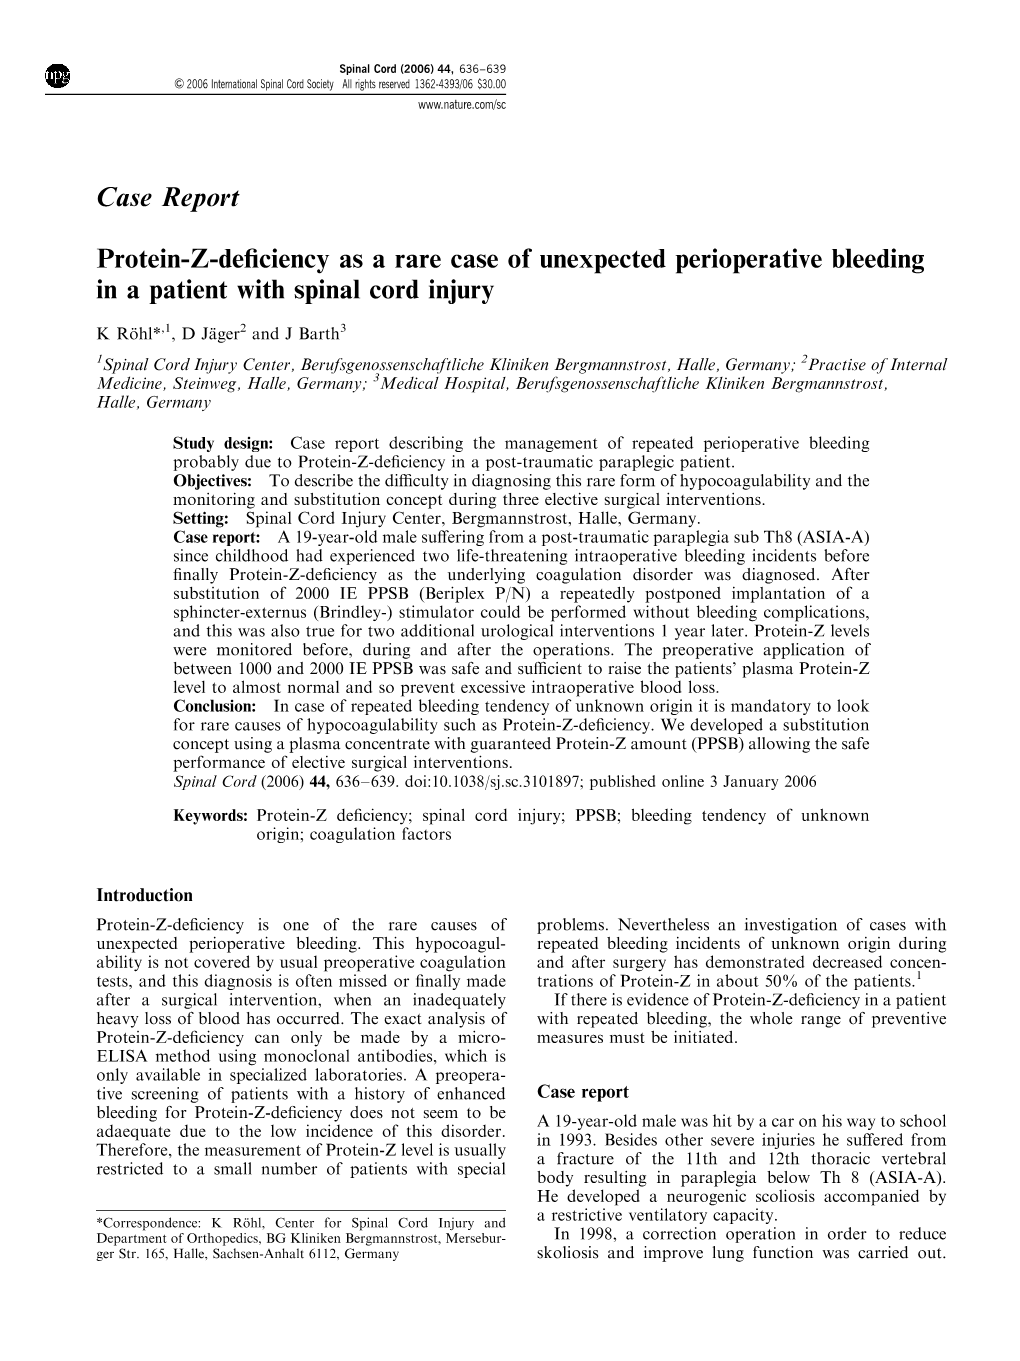 Protein-Z-Deficiency As a Rare Case of Unexpected Perioperative Bleeding in a Patient with Spinal Cord Injury